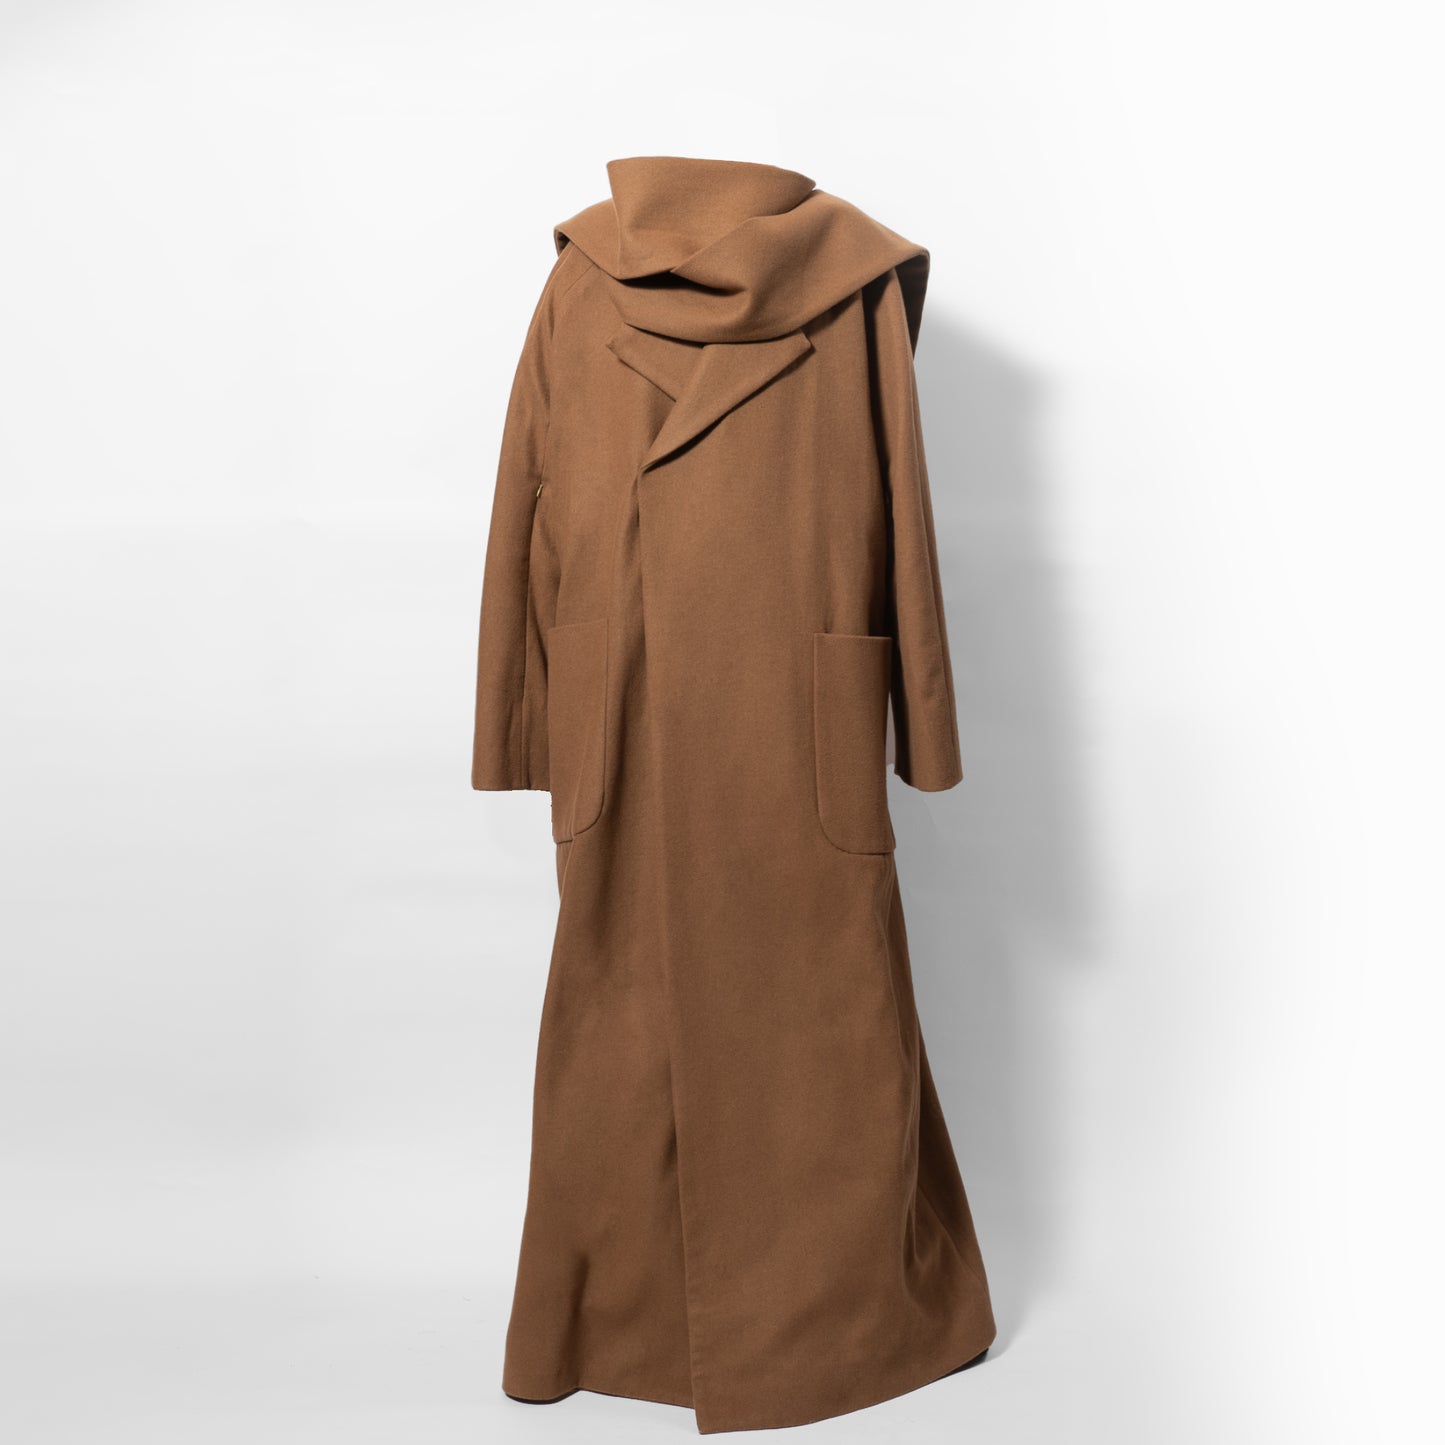 Oversize Floor length Tobacco Brown Coat with 2 oversized pocket, Elongated Collar and 3 way wear sleeve. Side slit and back vent. front view ghost image